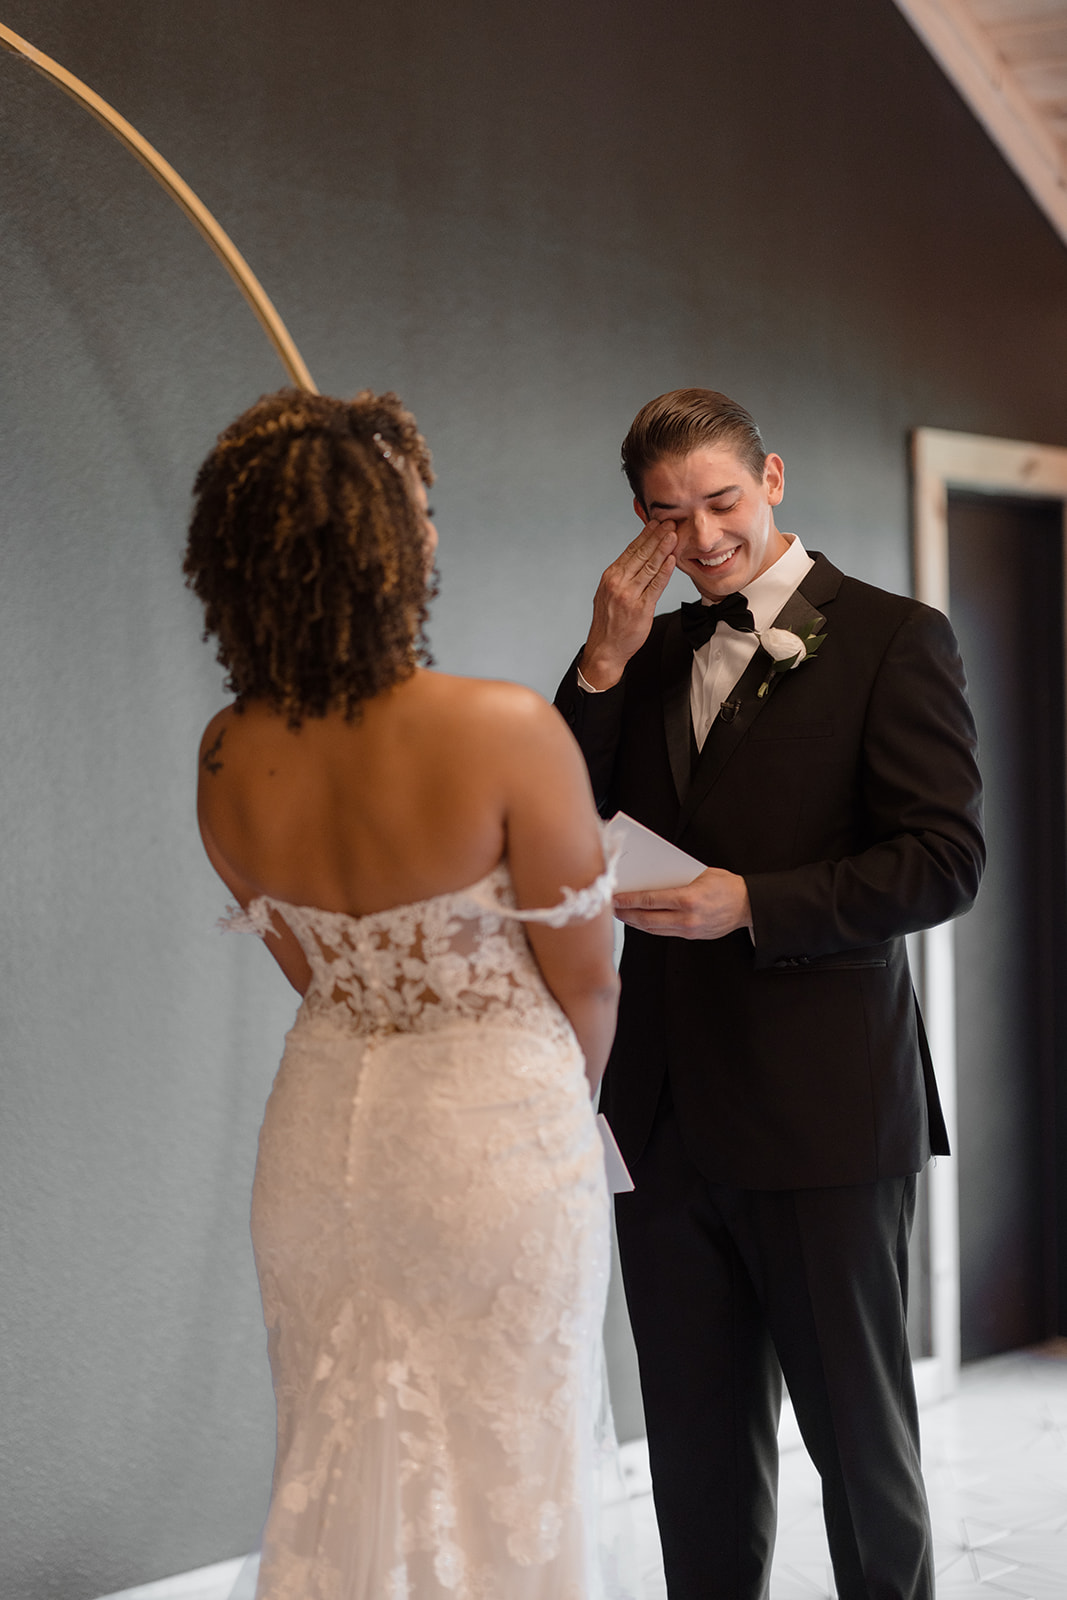 A groom crying at his first look with his bride